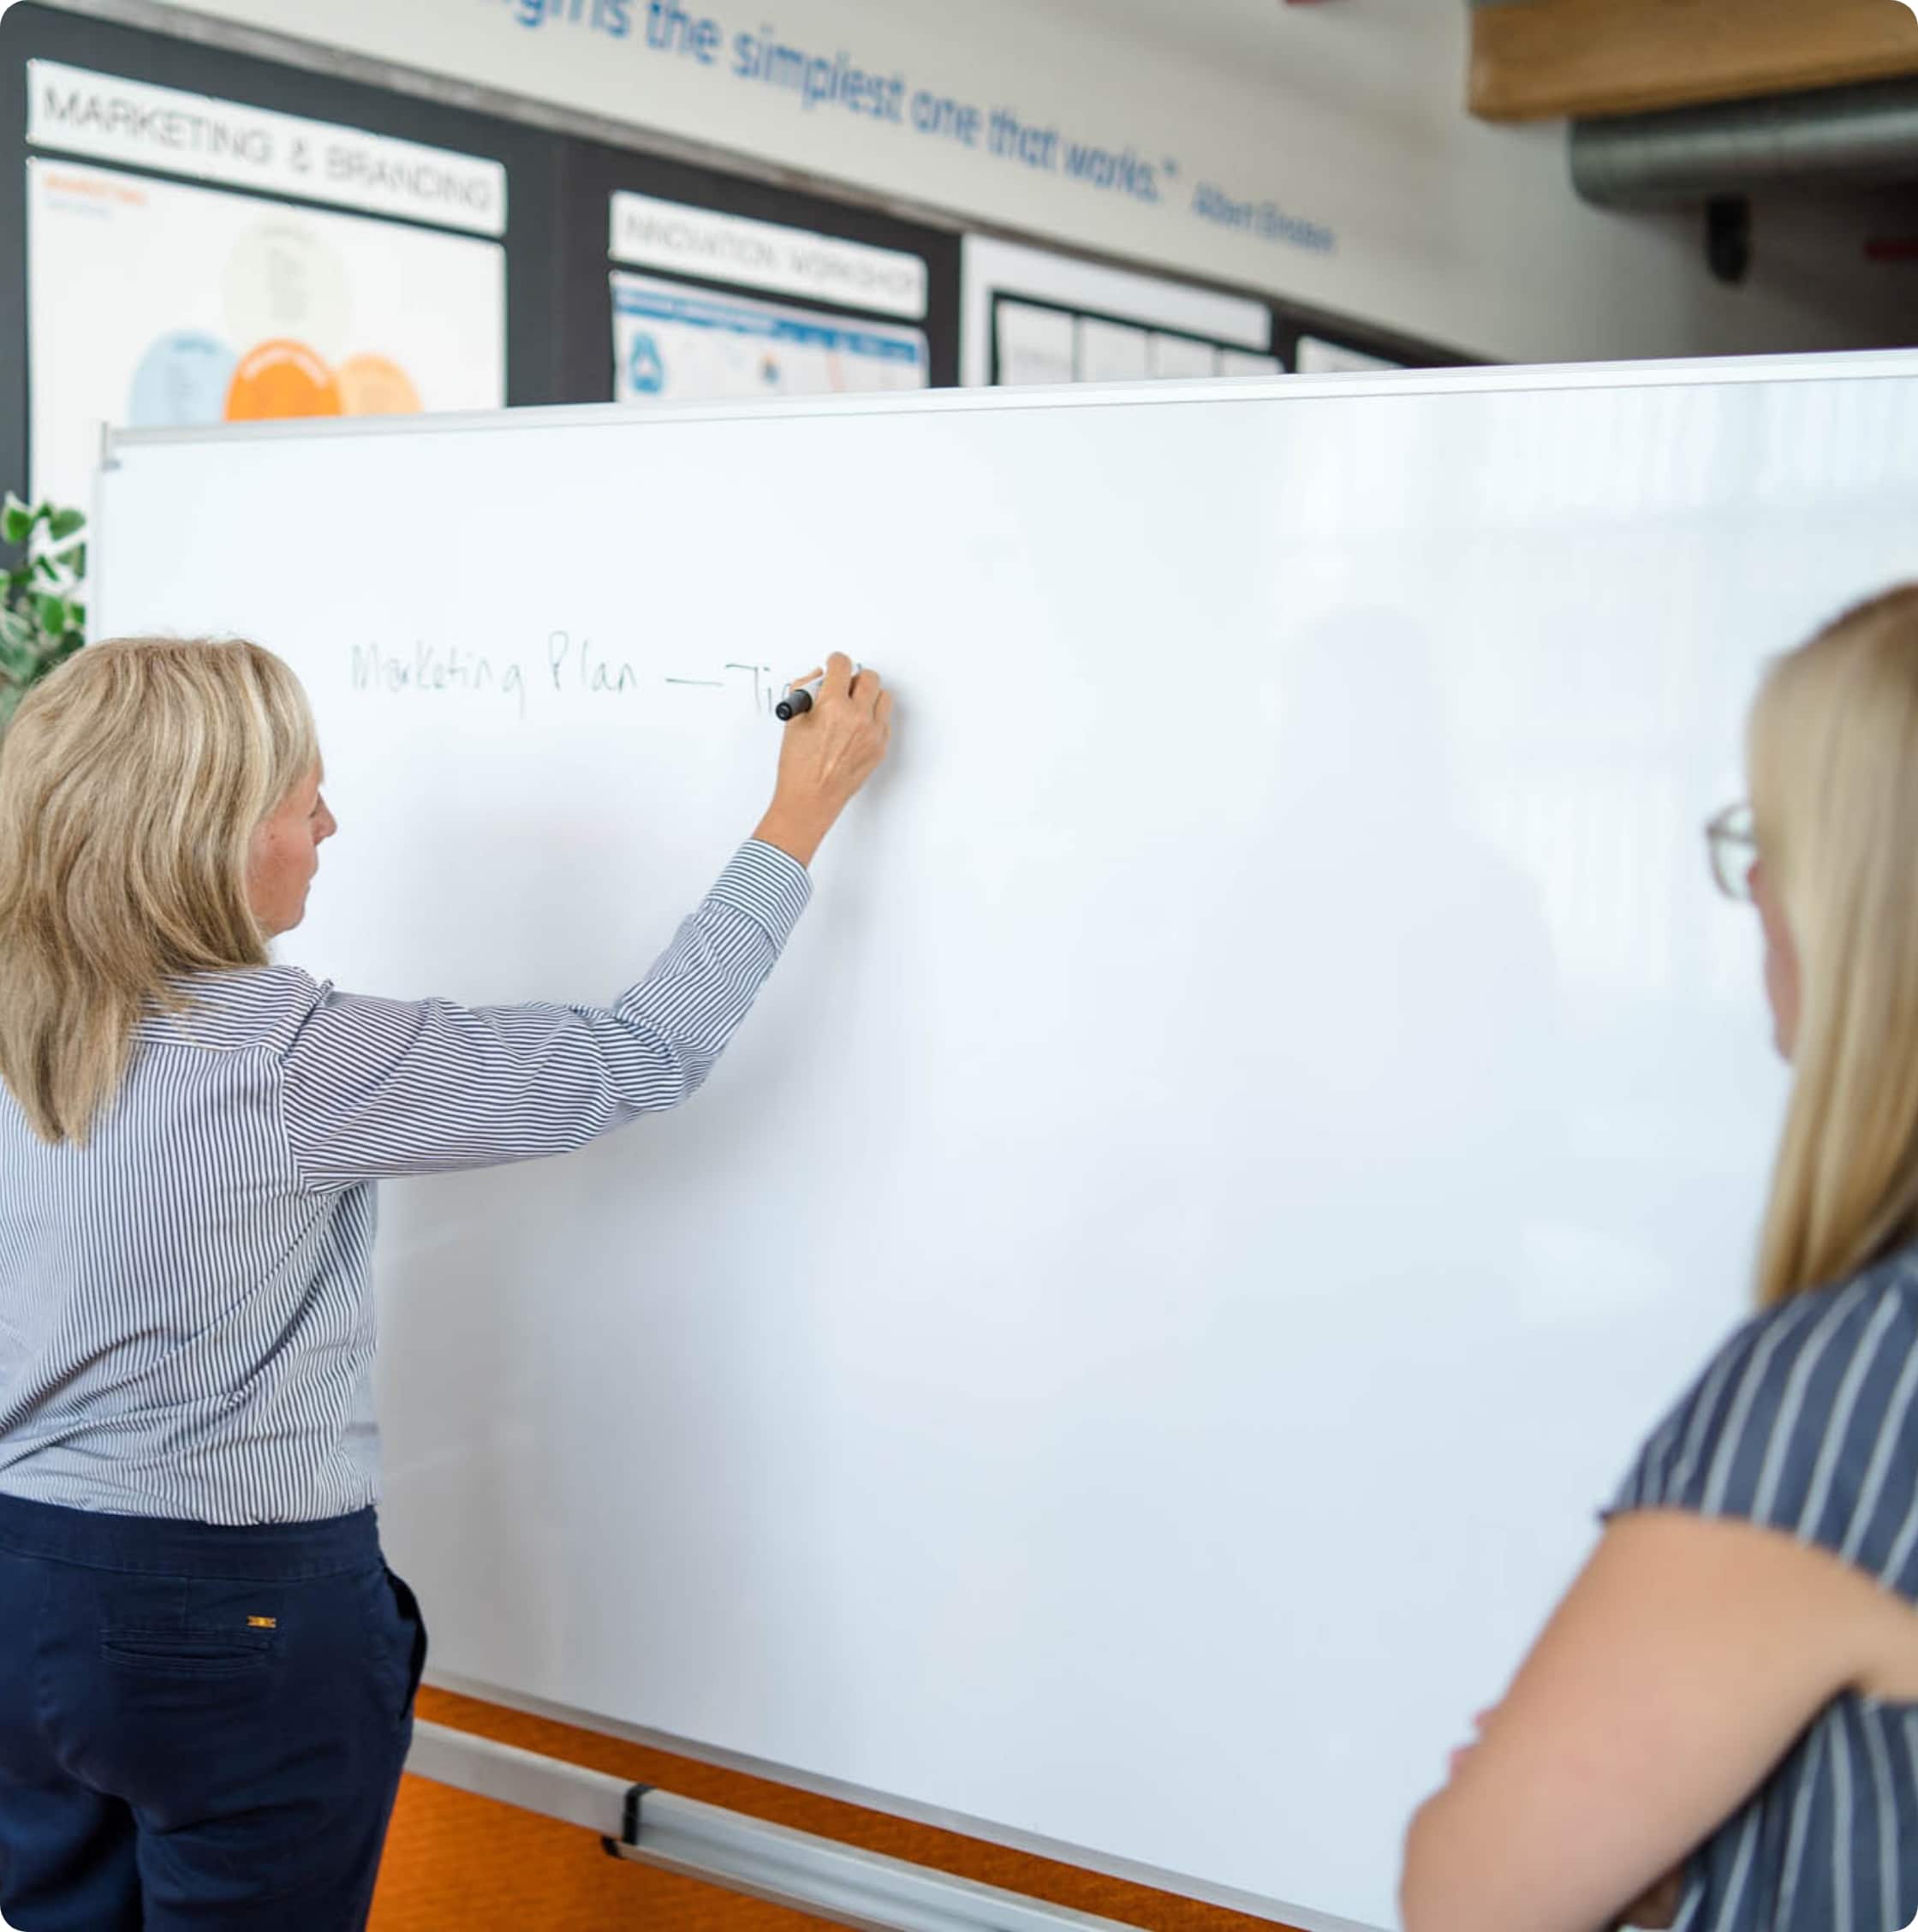 A women writes on a whiteboard while another woman watches